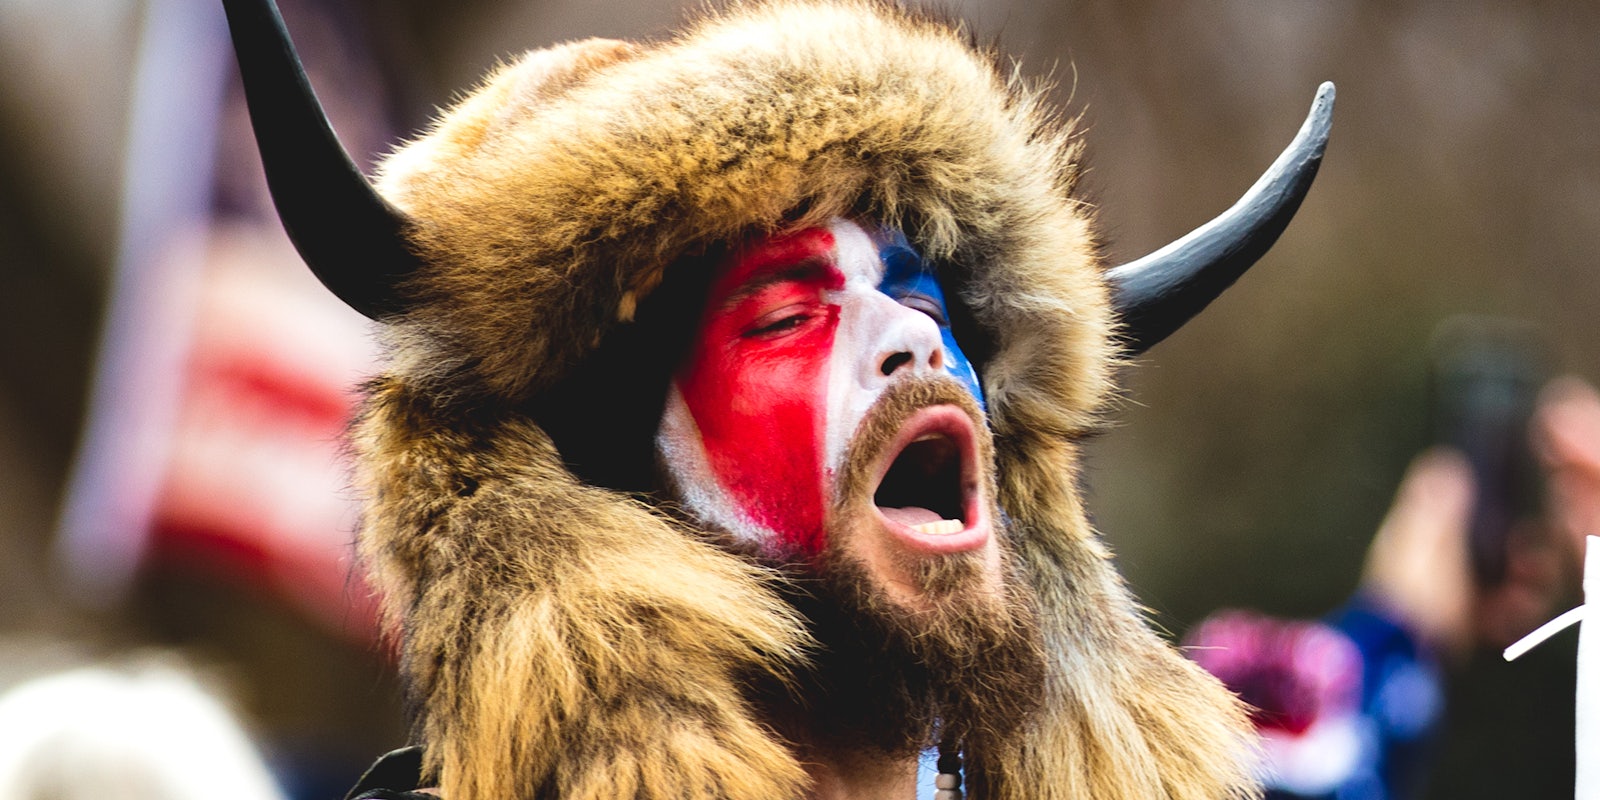 Jake Angeli, the 'Qanon Shaman' in red white and blue face paint and headdress.